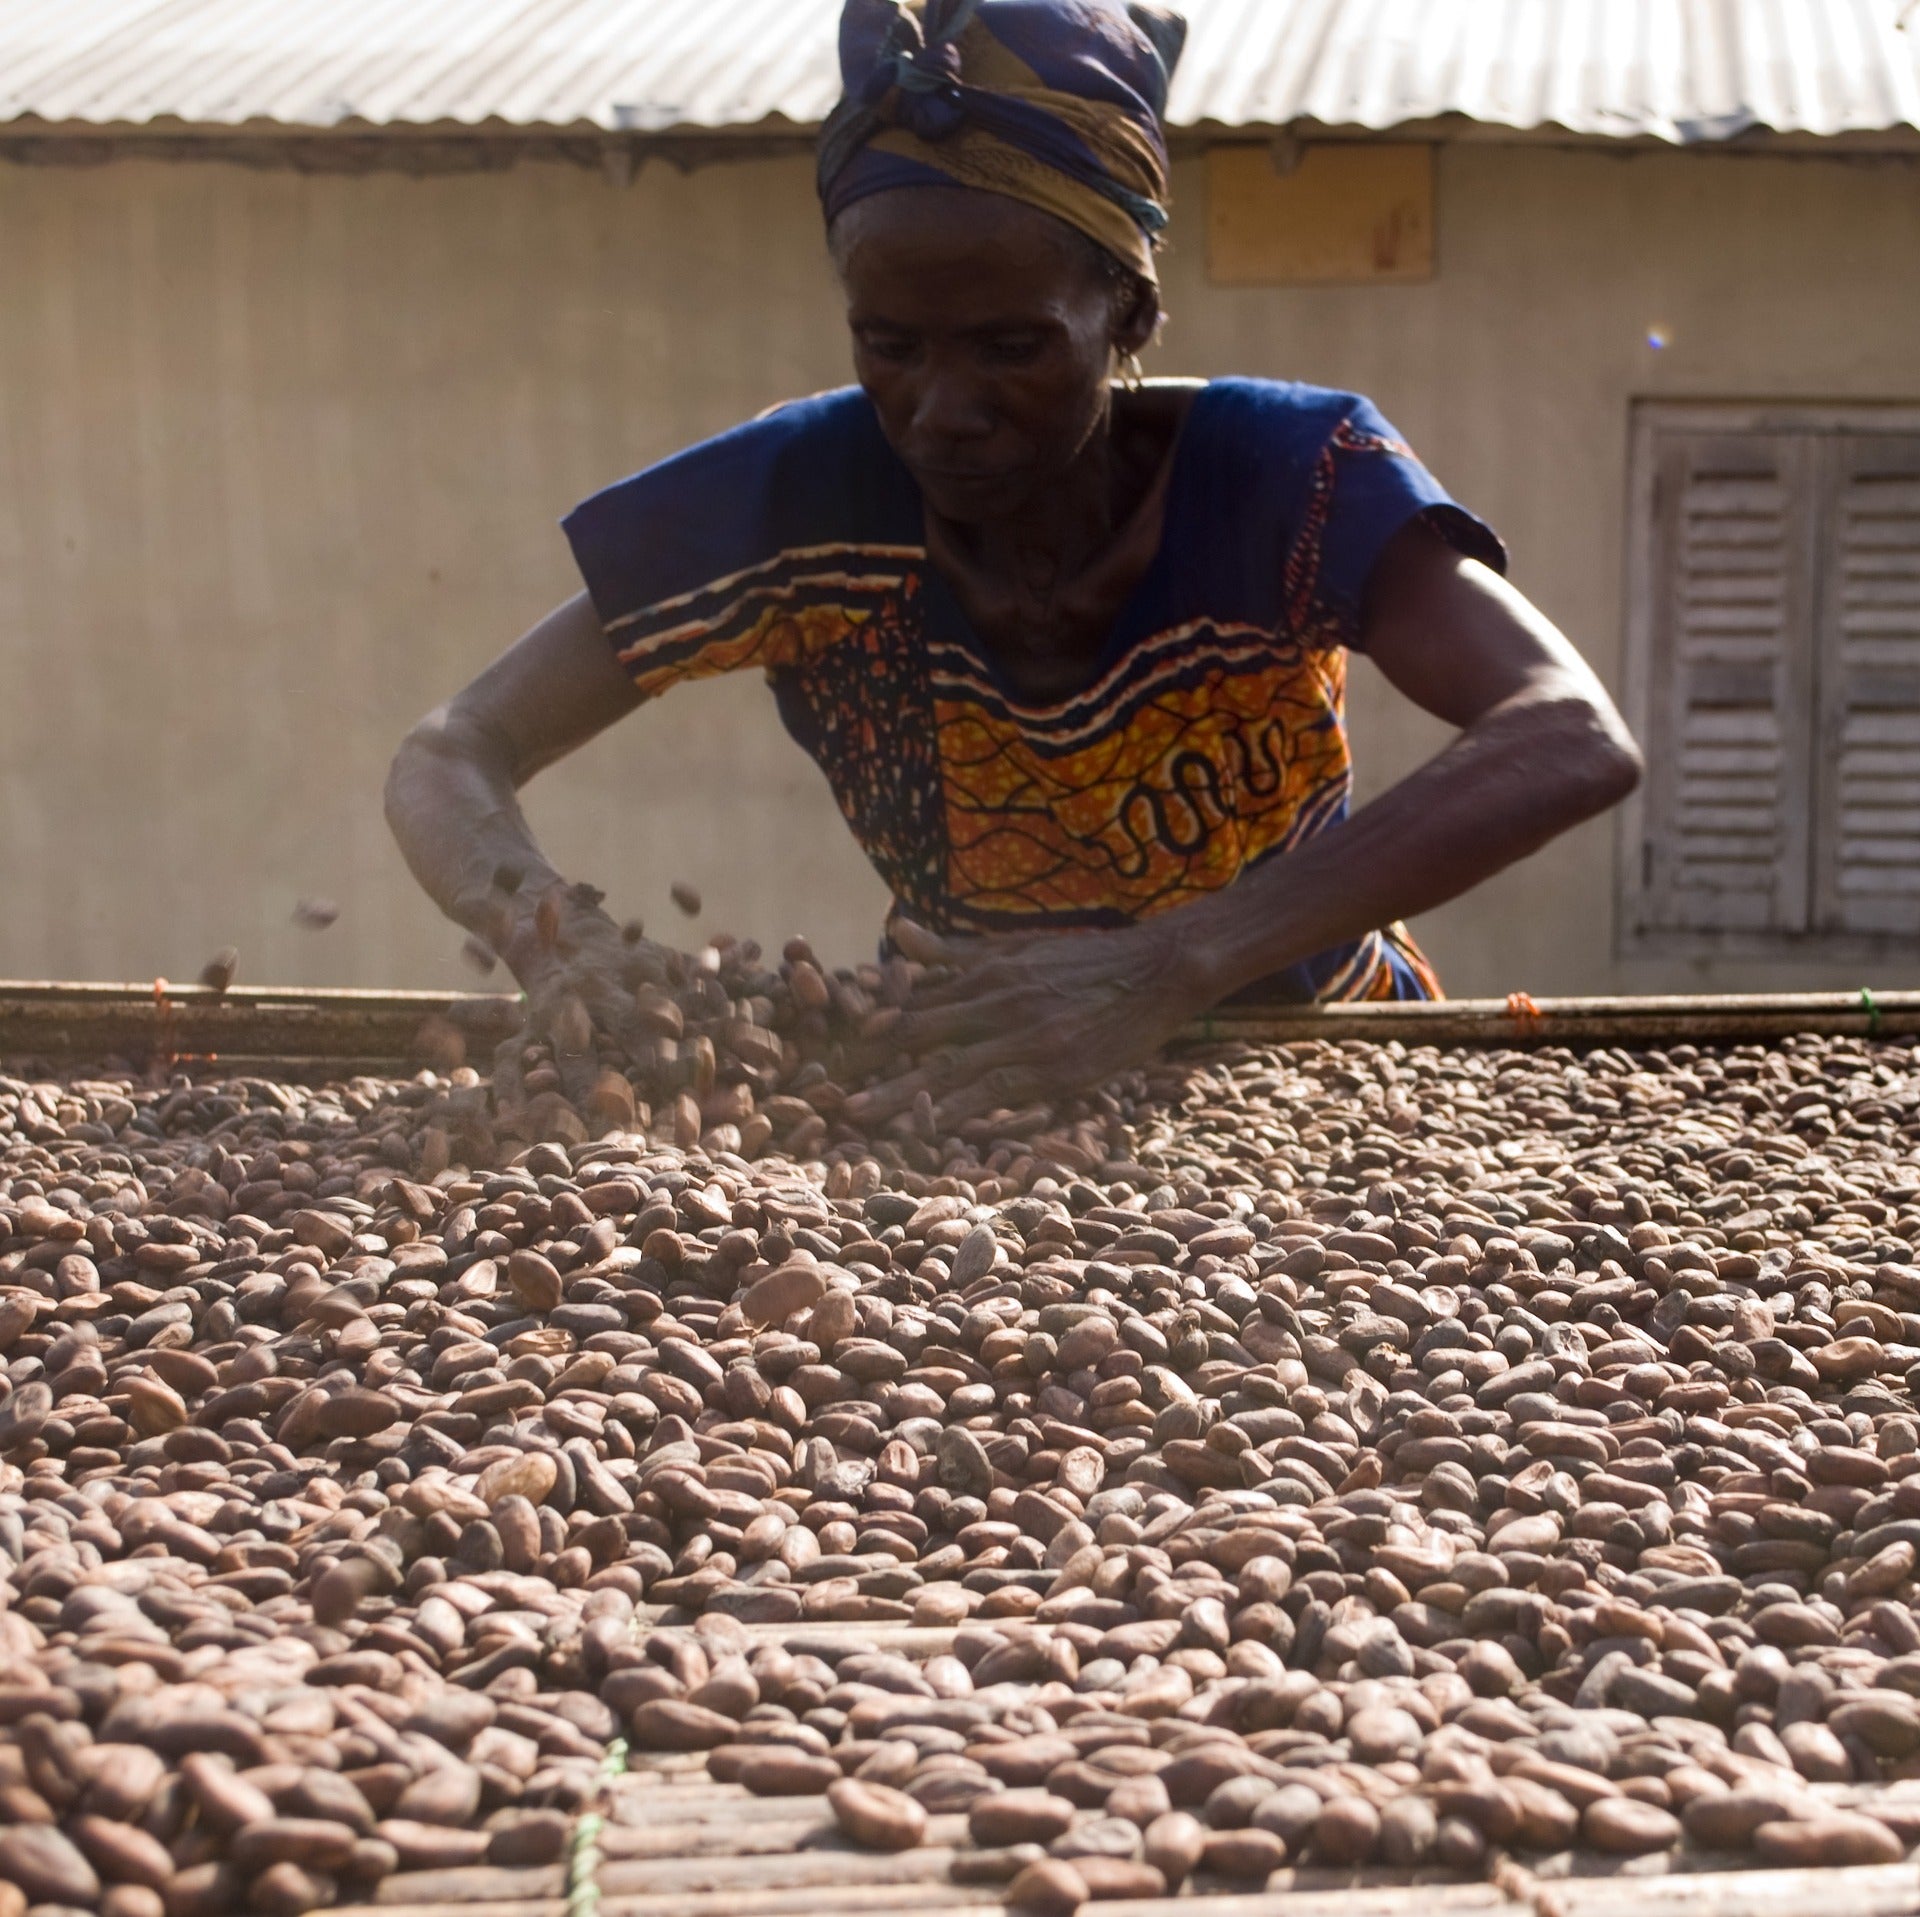 An African woman drying cacao beans out in the sun